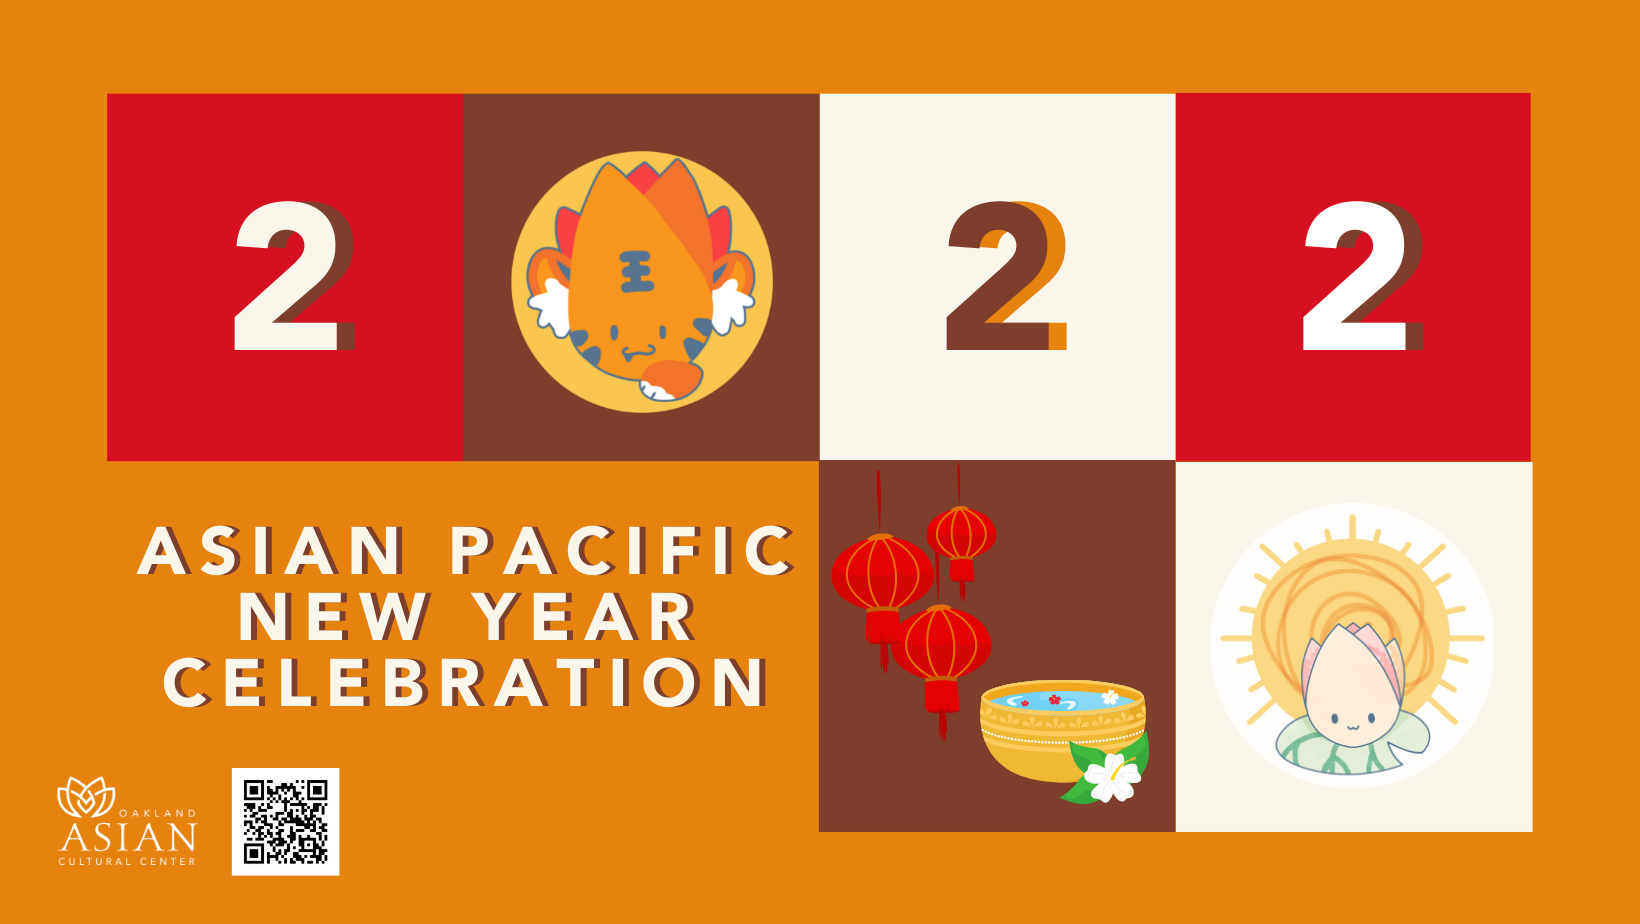 Cultural Hub #1: Oakland Asian Cultural Center (OACC) Asian Pacific New Year Celebration Image